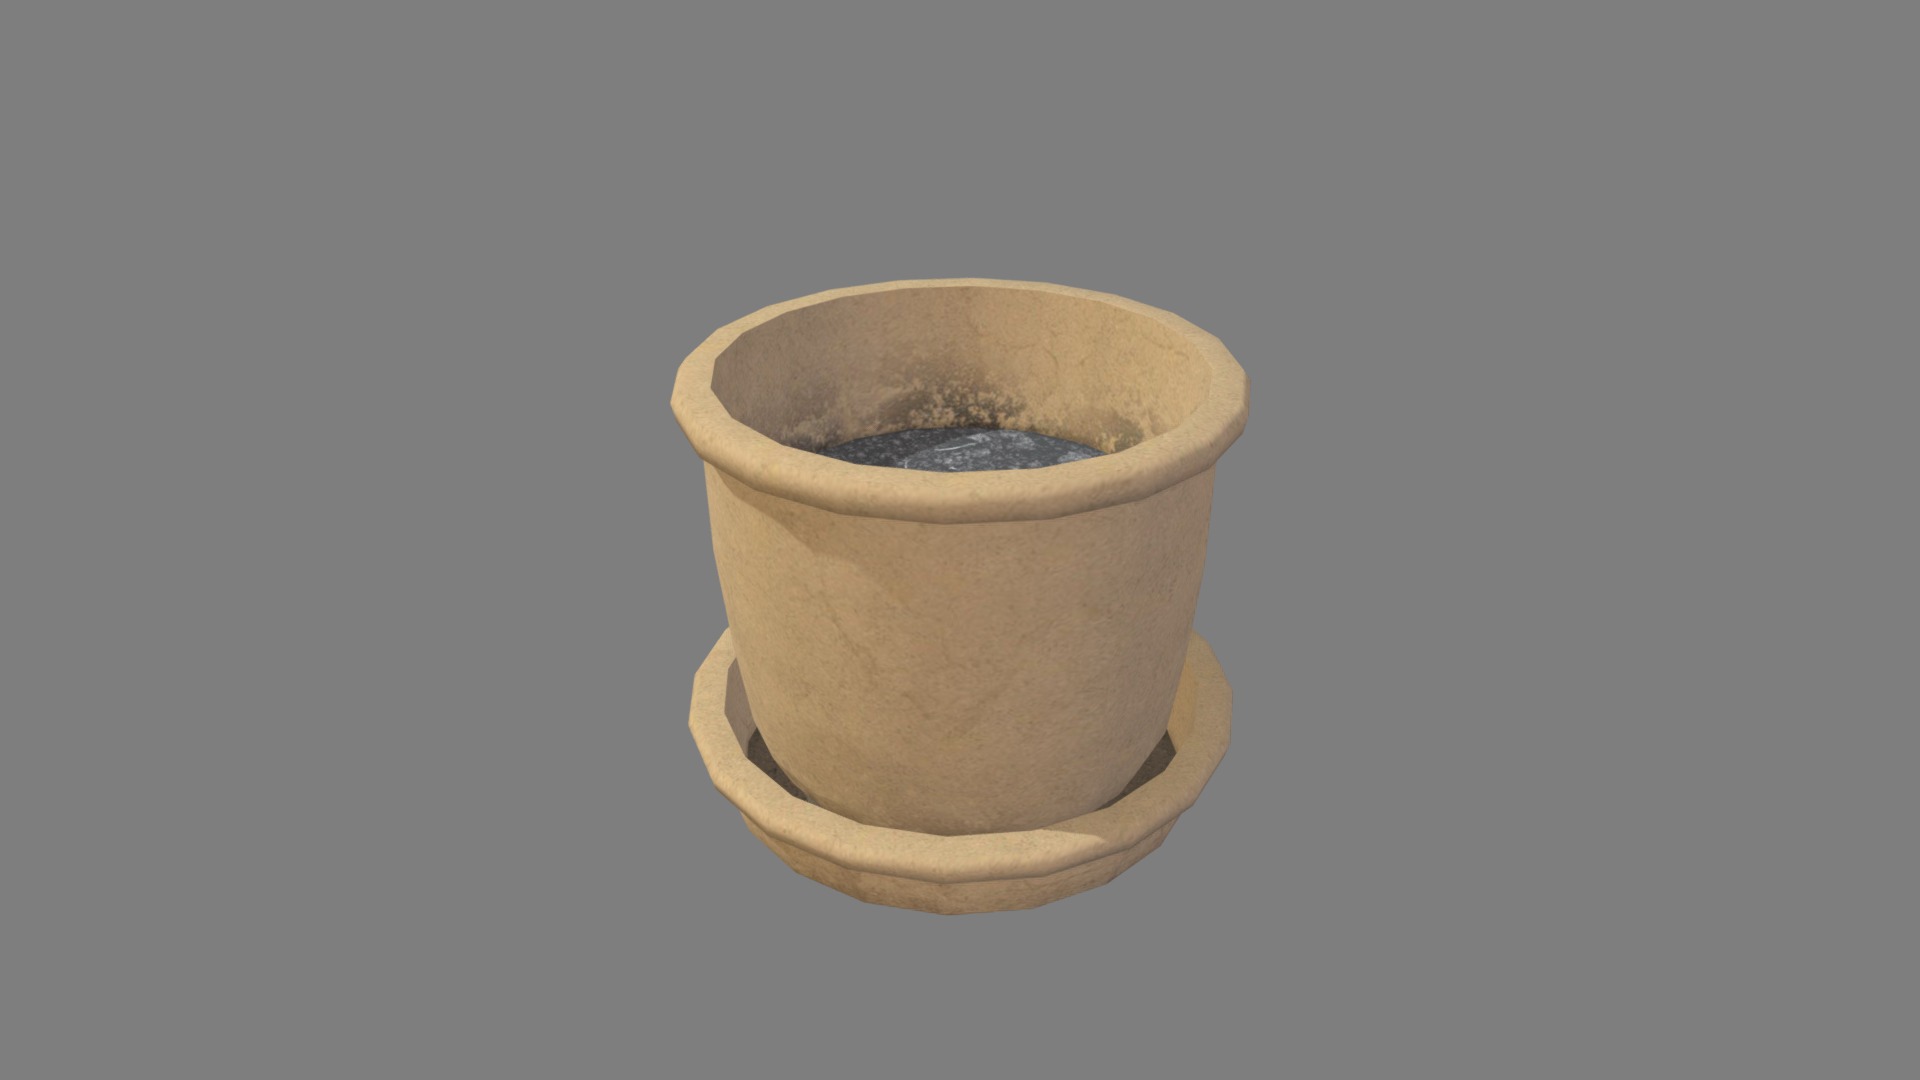 3D model Pot 01 - This is a 3D model of the Pot 01. The 3D model is about a cup on a table.